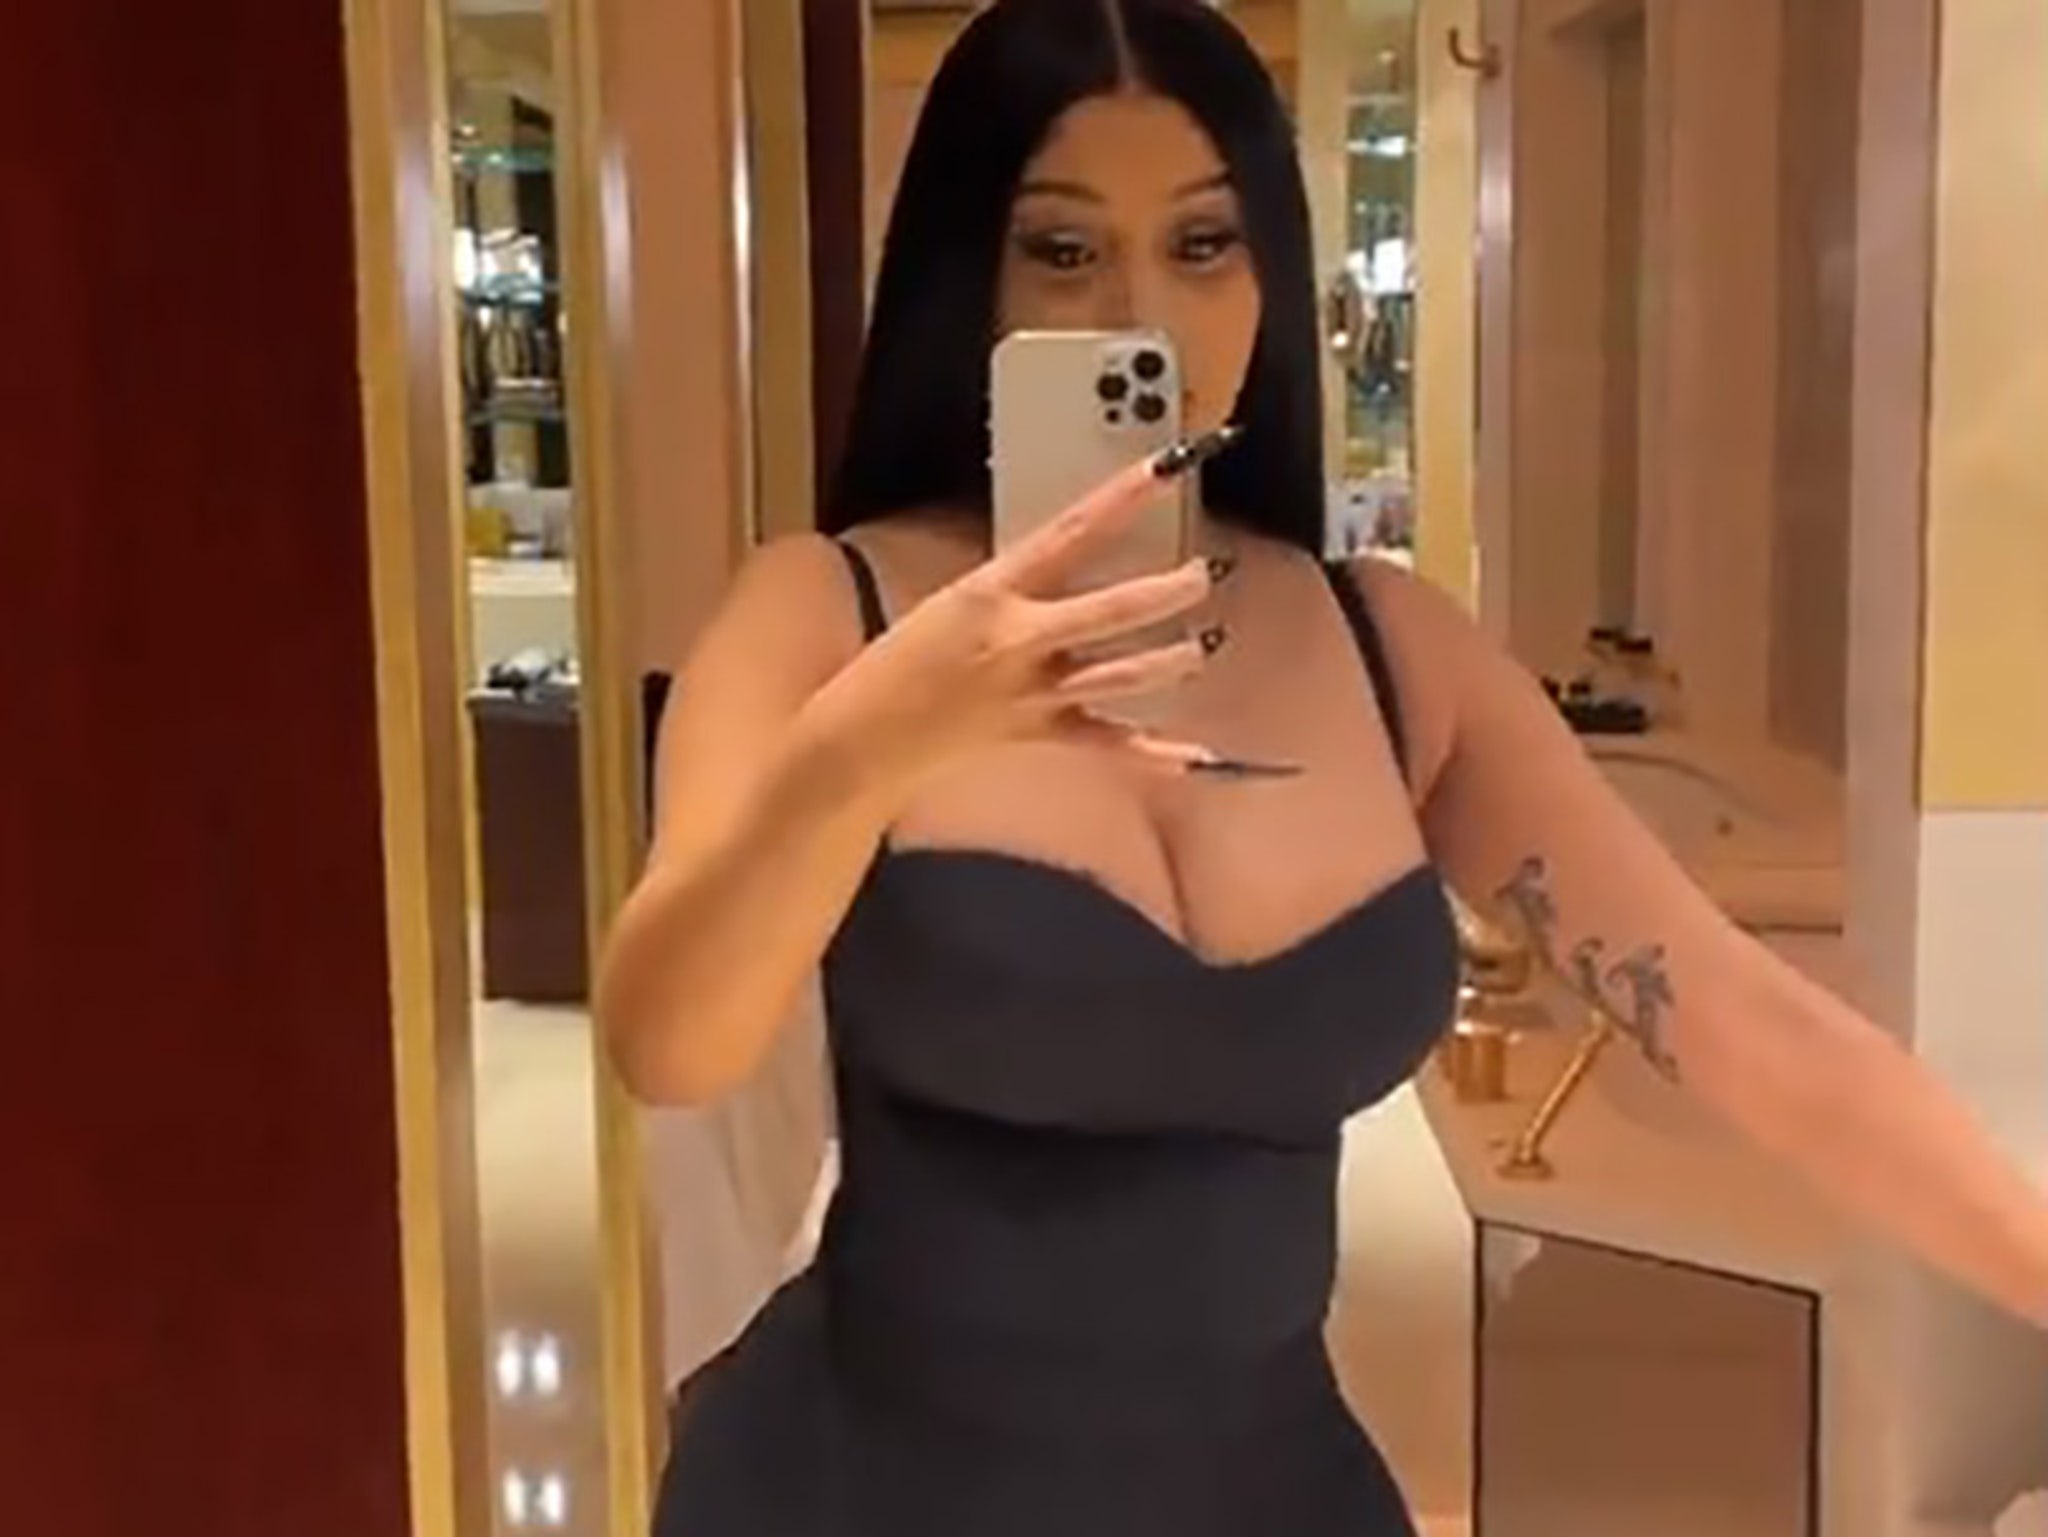 Cardi B Gets Real About Post-Pregnancy Body Amid Speculation: No Surgery,  Still 'Snatched'